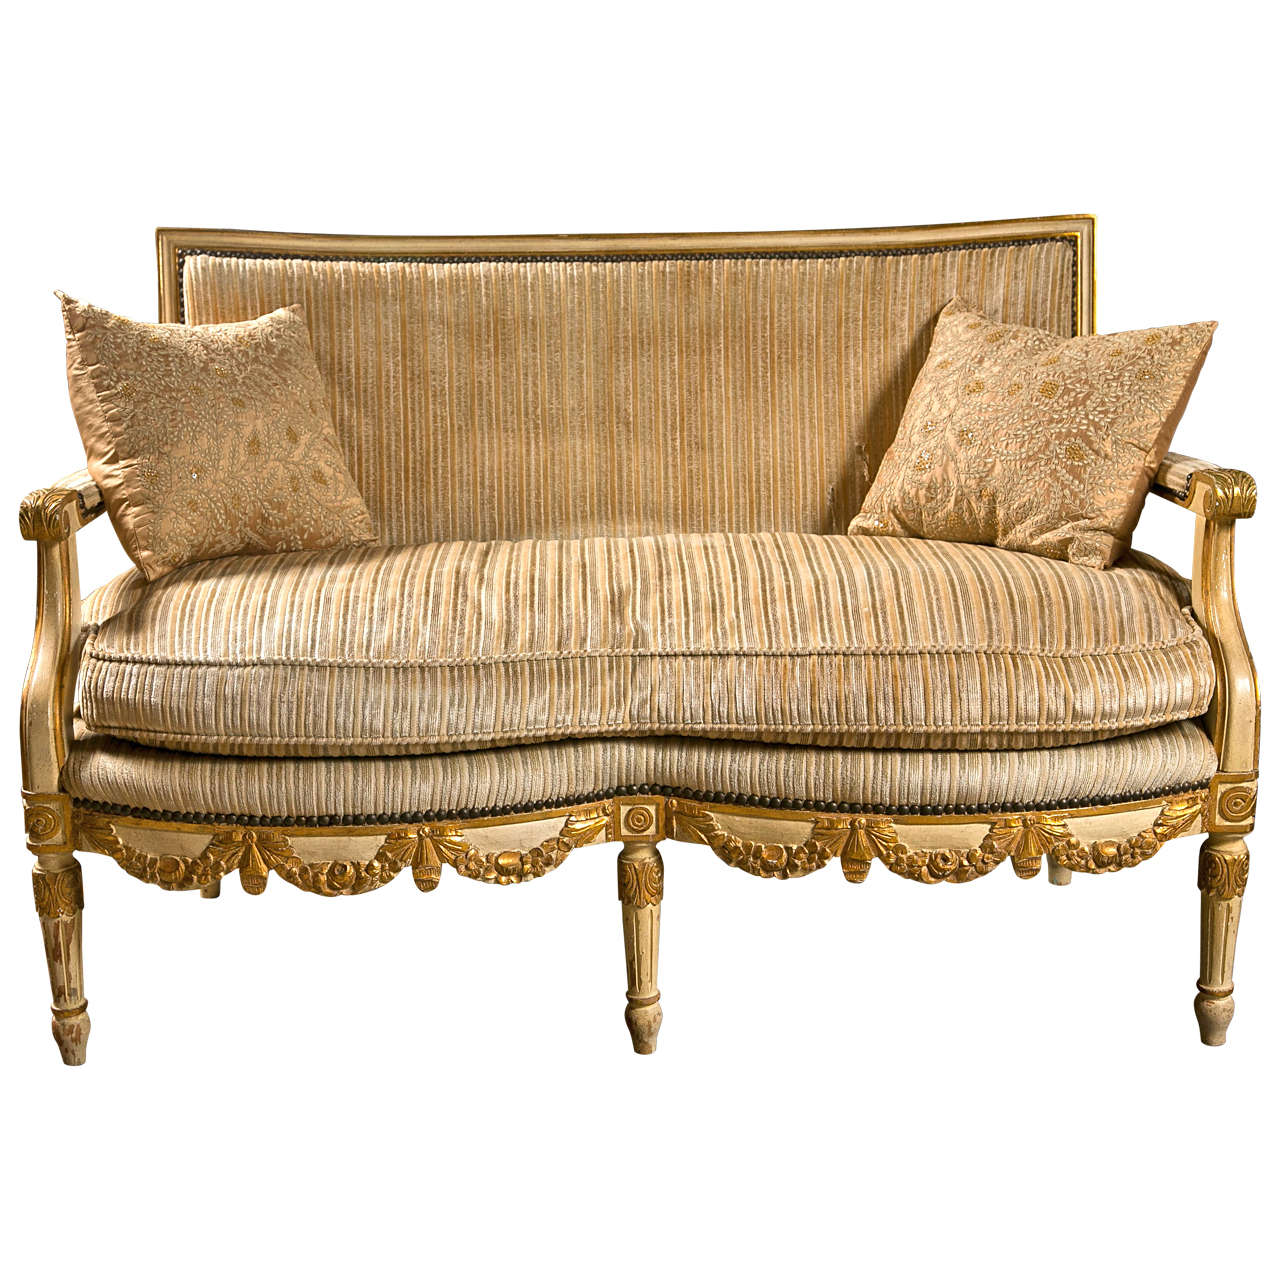 Validatie analoog Metafoor French Louis XIV Style Canape Sofa Settee at 1stDibs | canape louis 14,  canapé louis xiv, canape louis xiv